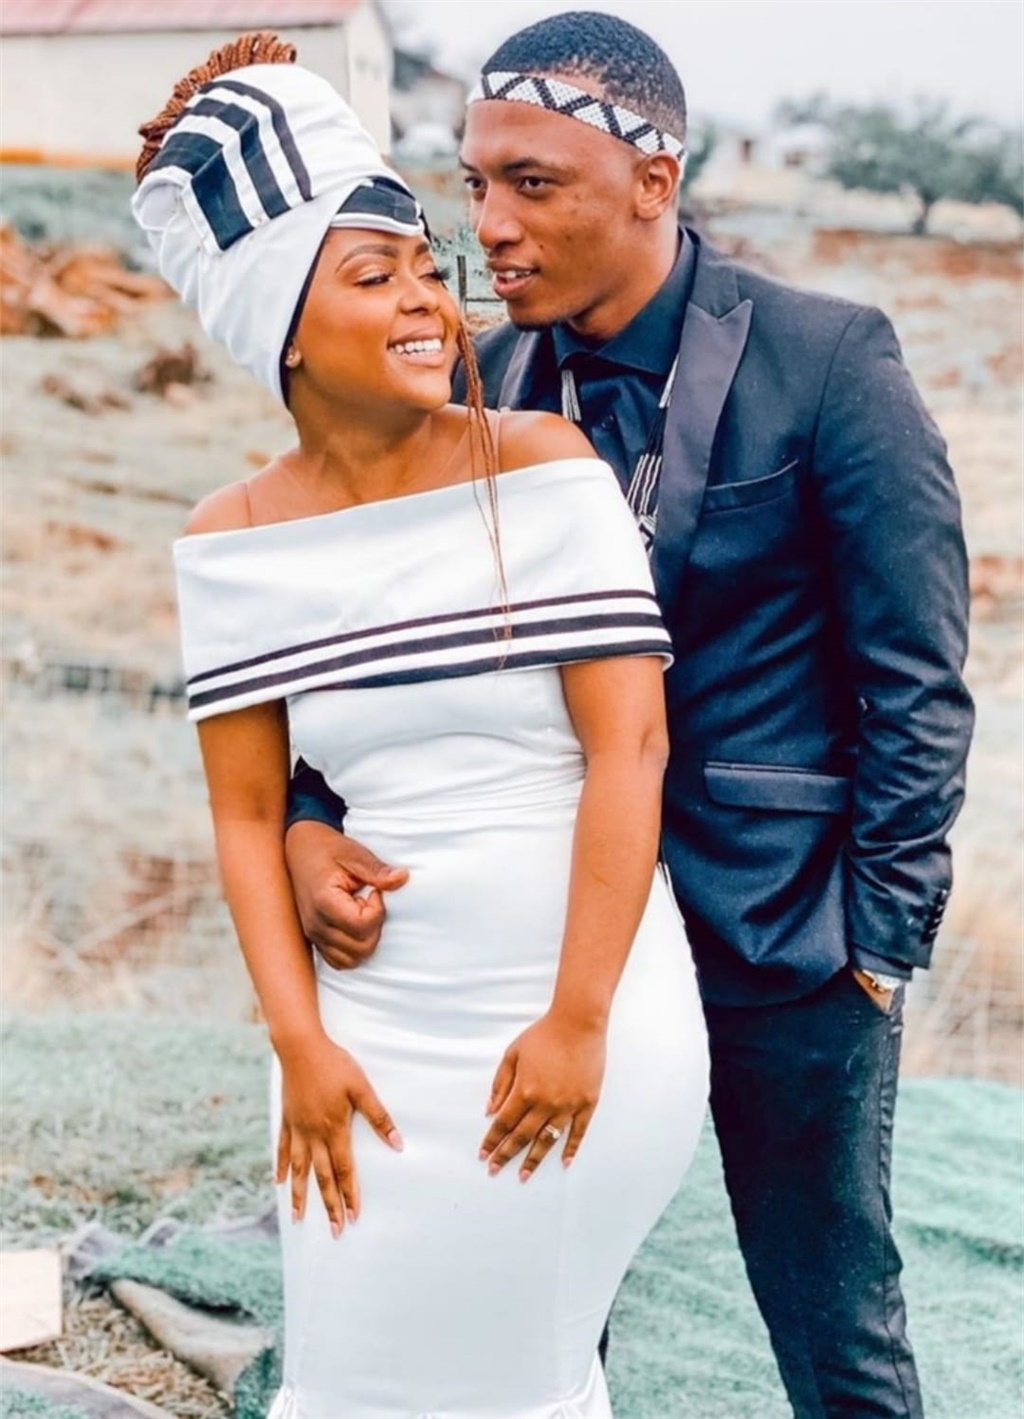 Gospel singer and songwriter Dumi Mkokstad and wife.